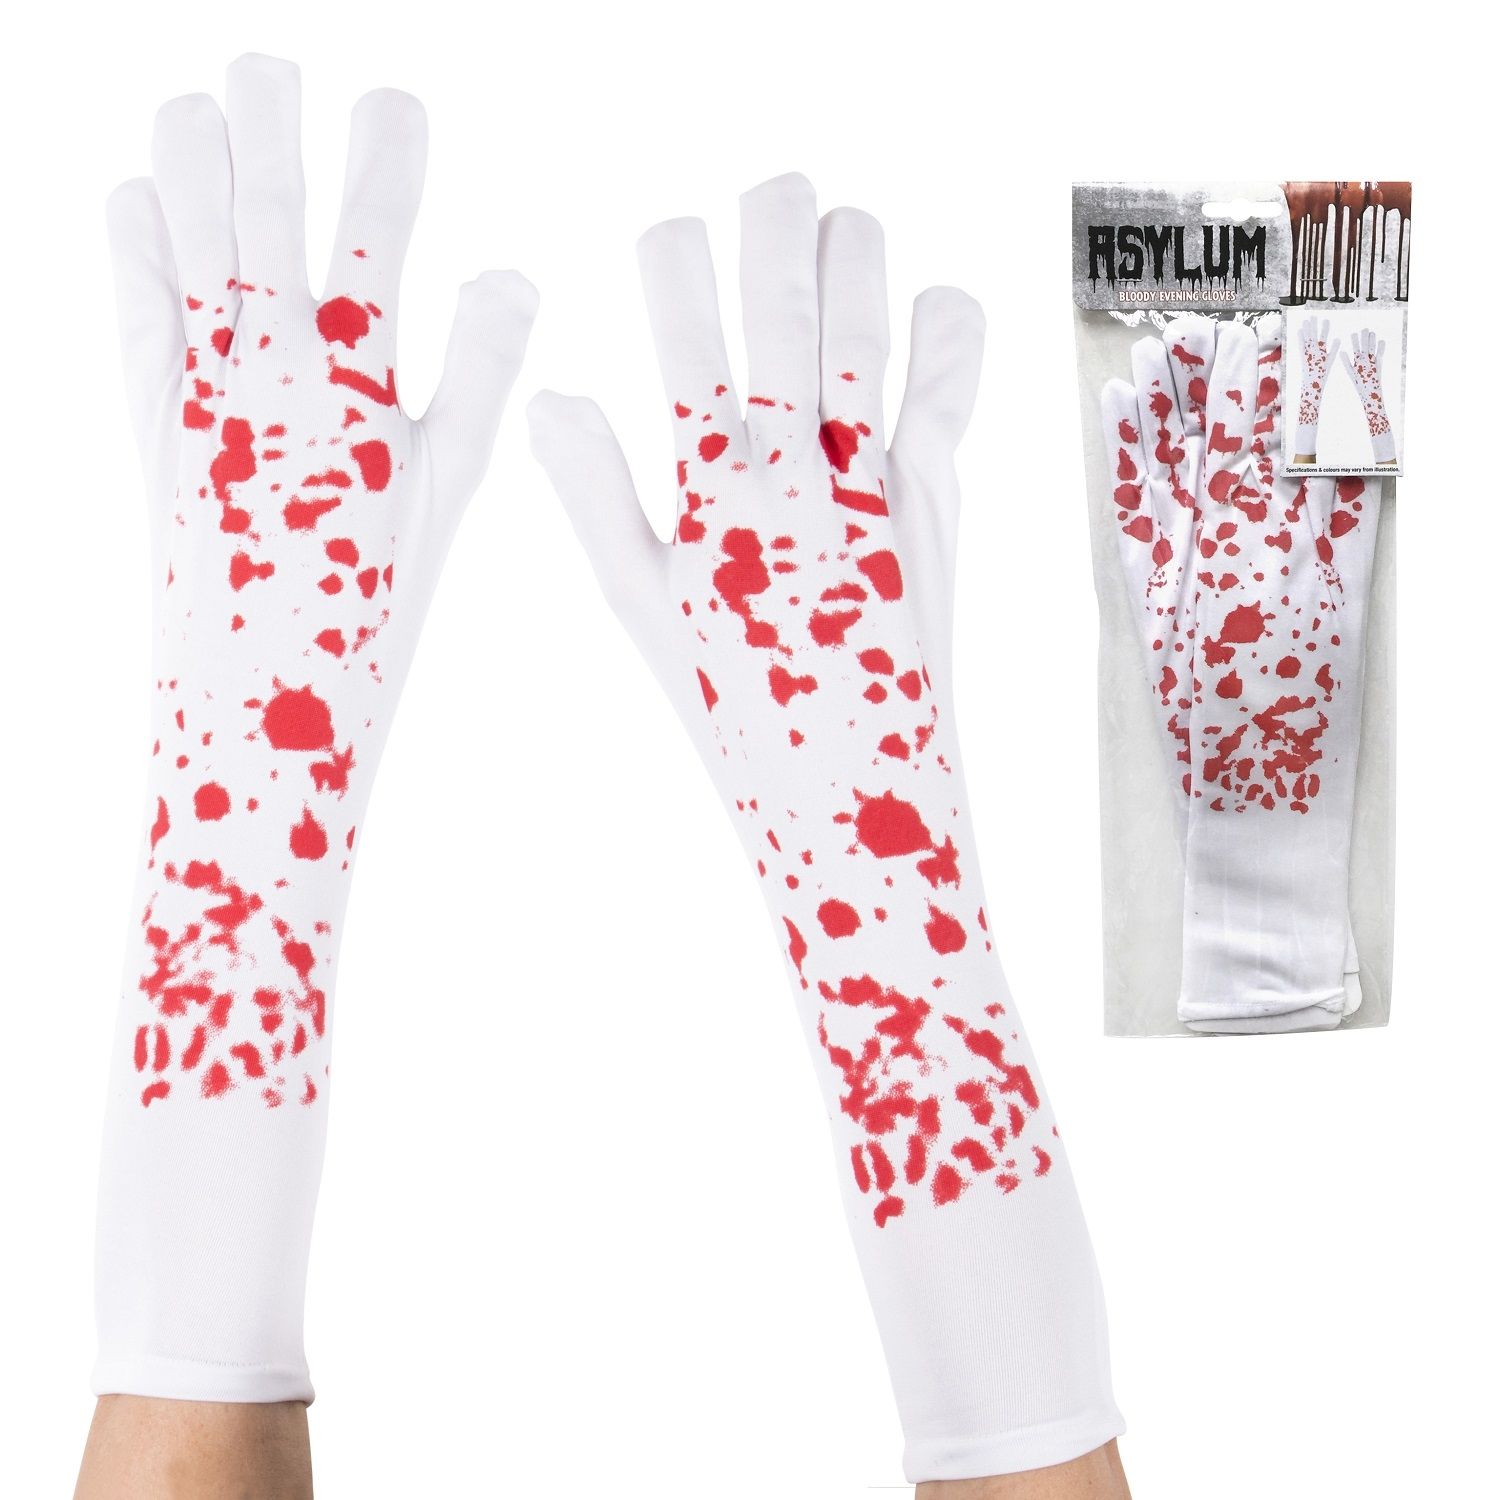 BLOODY EVENING GLOVES ADULTS